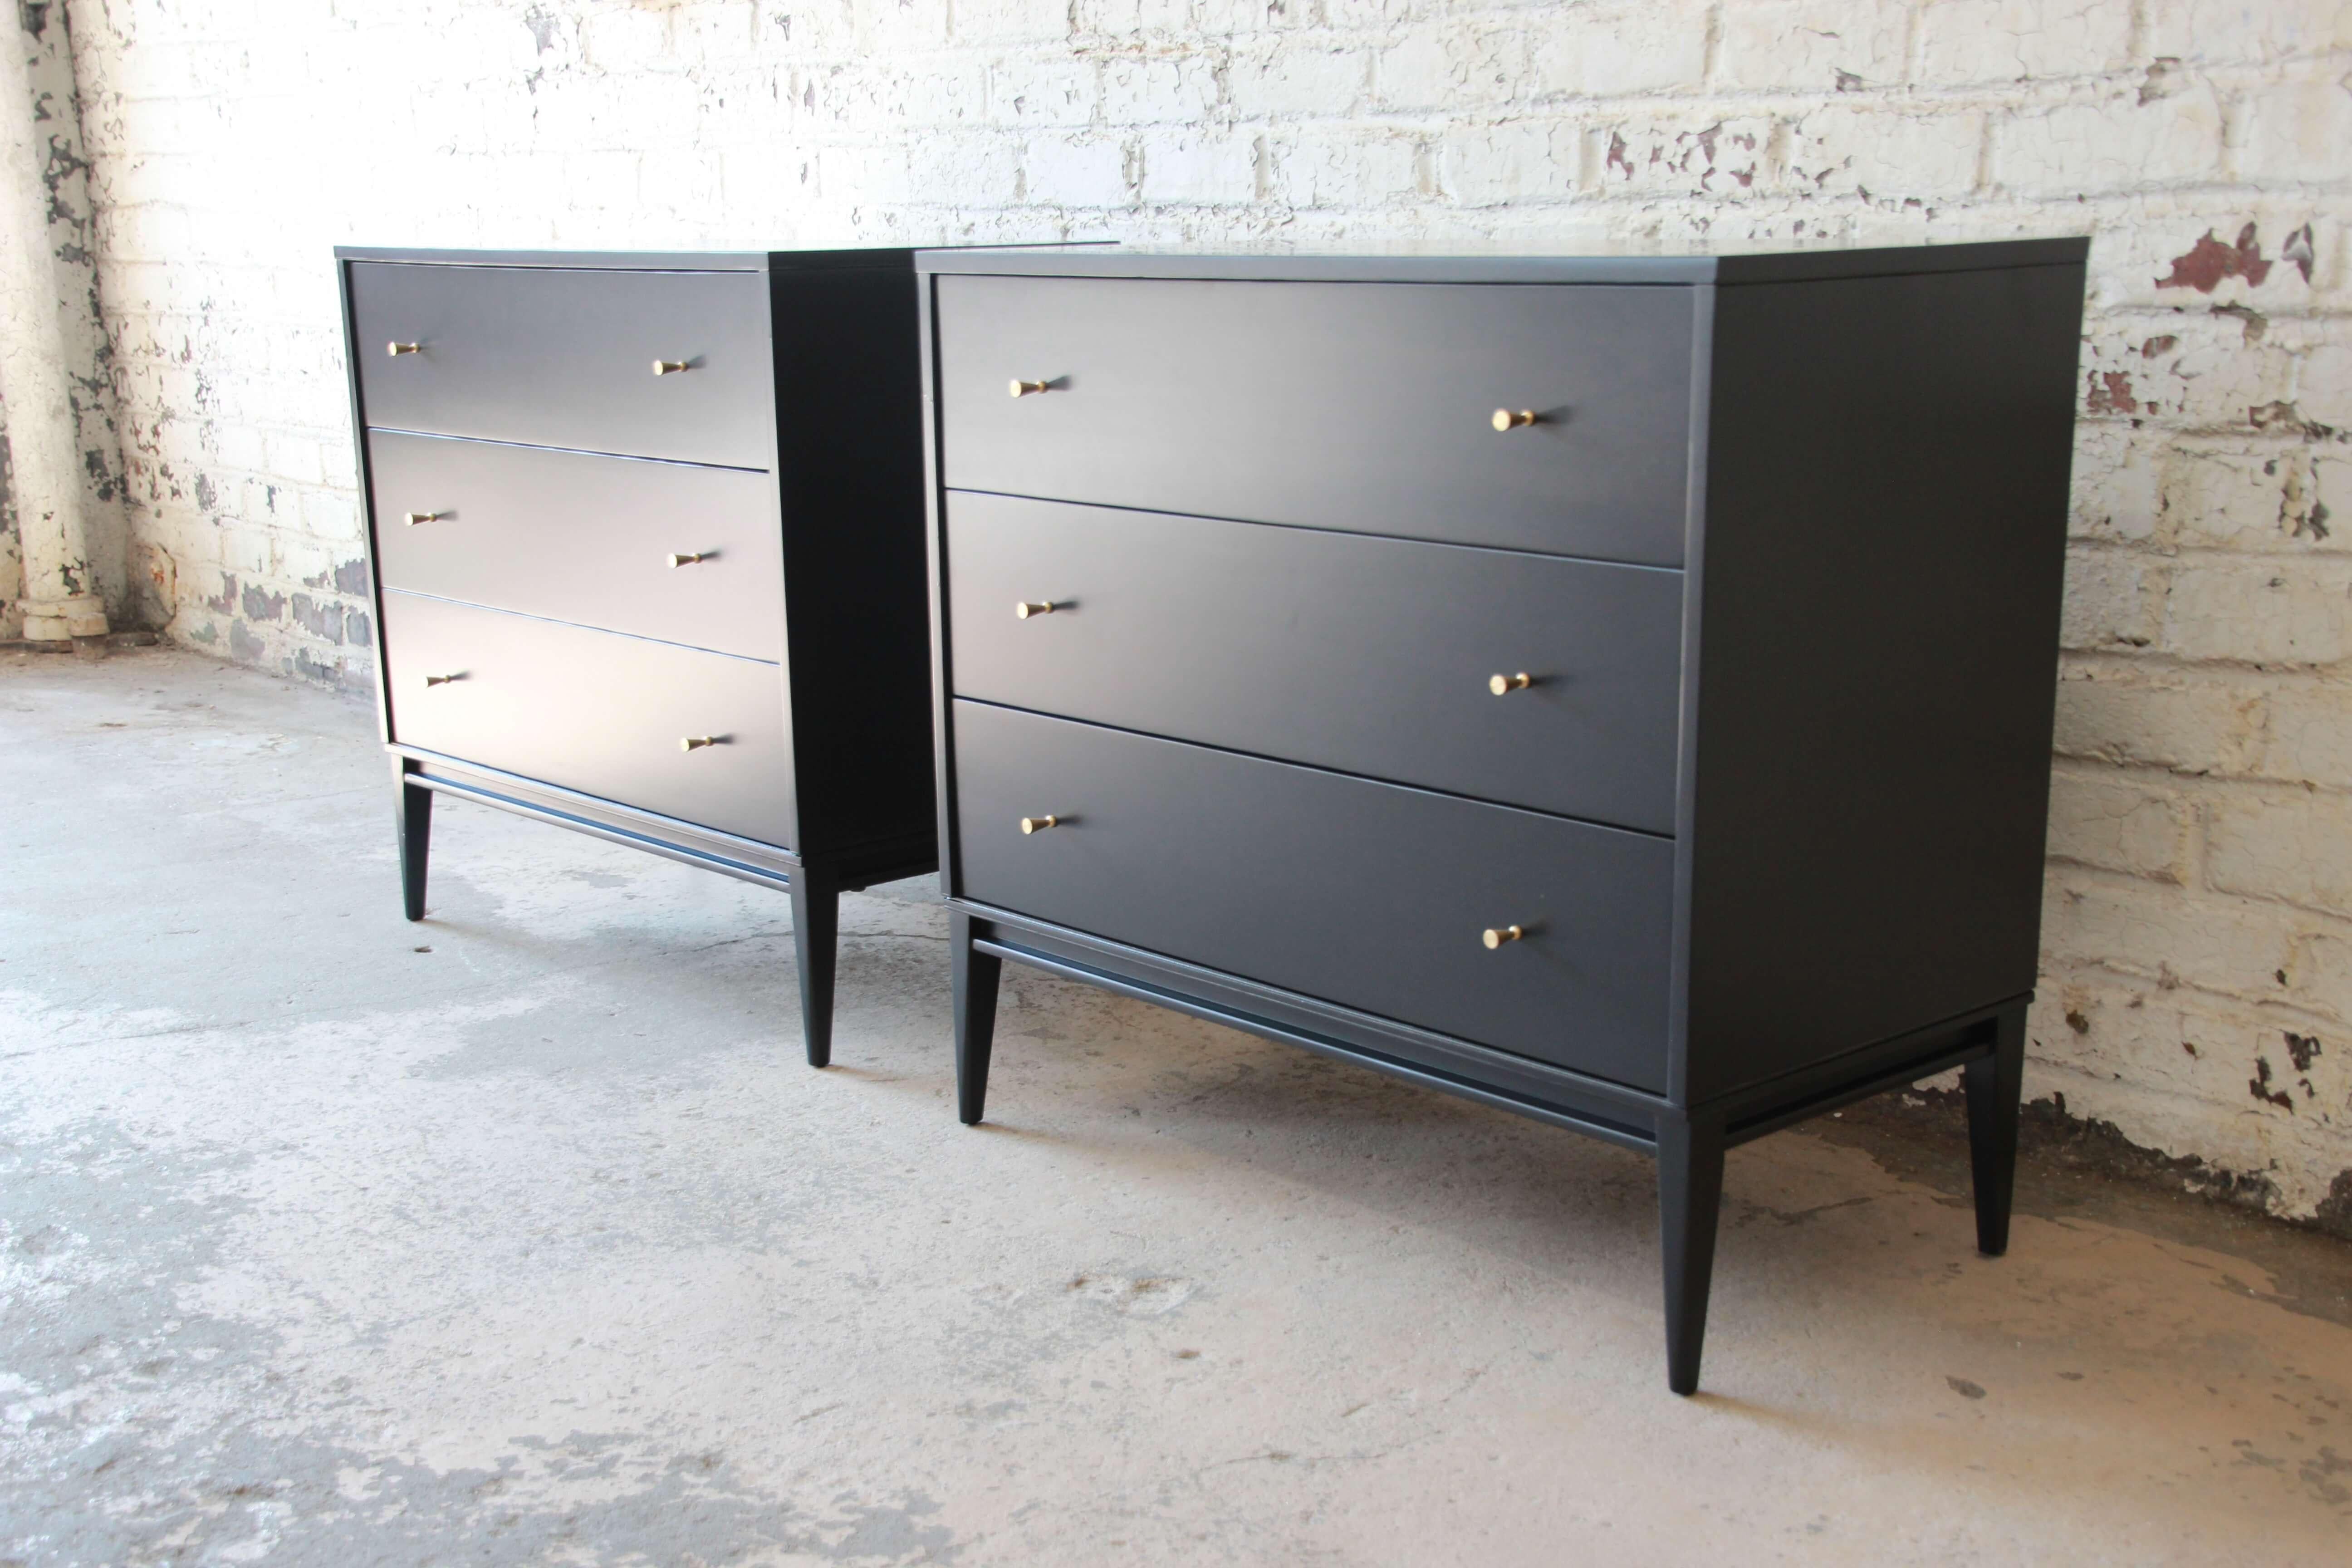 Offering an outstanding pair of Paul McCobb Planner Group three-drawer chests or nightstands. The chests are newly refinished with polished brass pulls. Each chest has three drawers that offer ample storage in this simplistic and iconic design seen